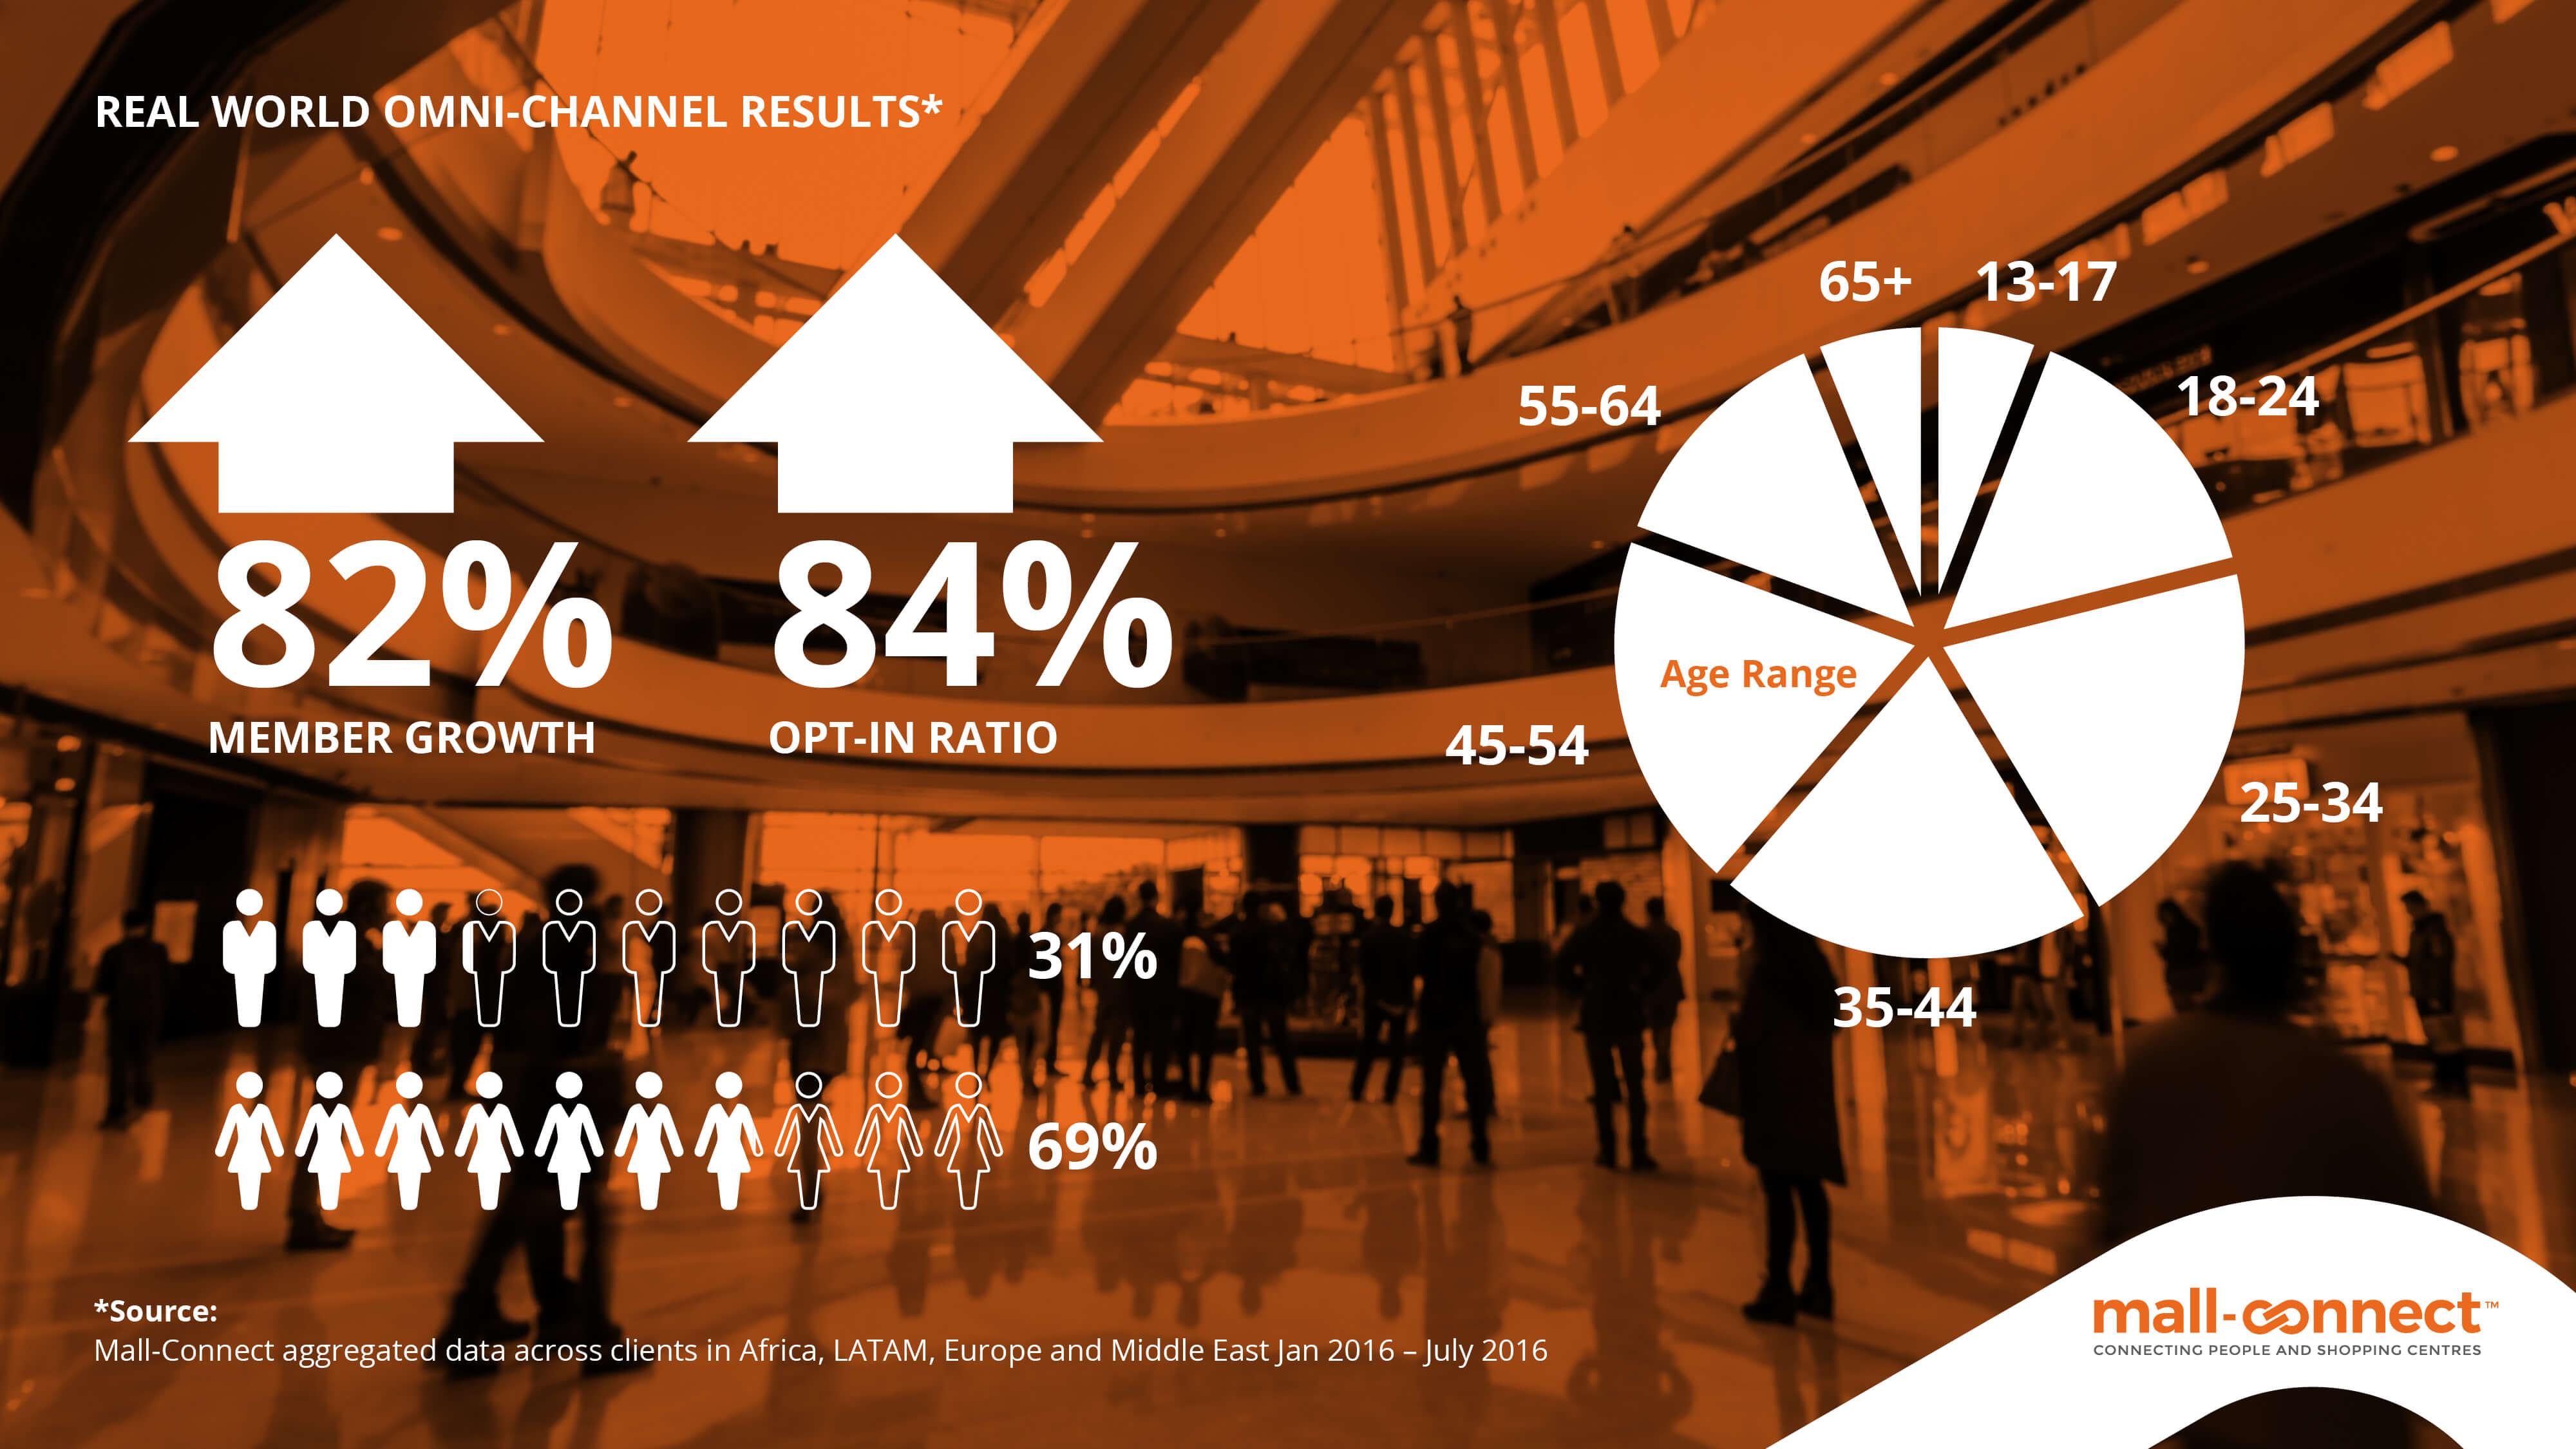 The Source Mall Logo - Mall-Connect | Omni-channel mall marketing results from 4 continents